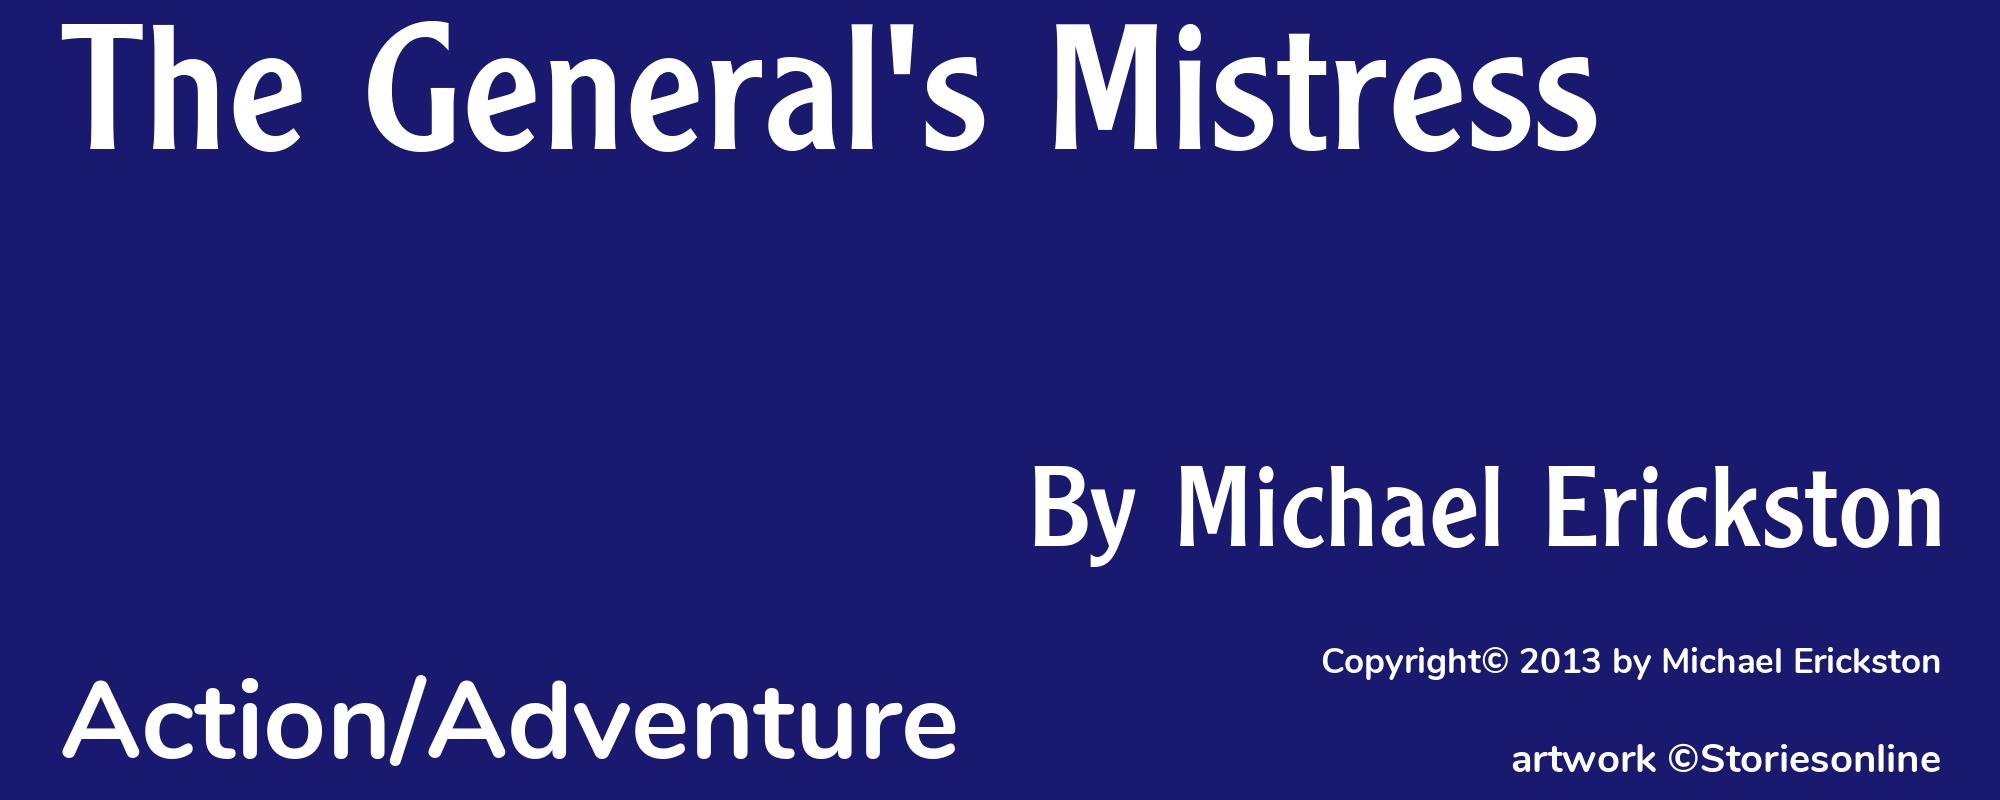 The General's Mistress - Cover